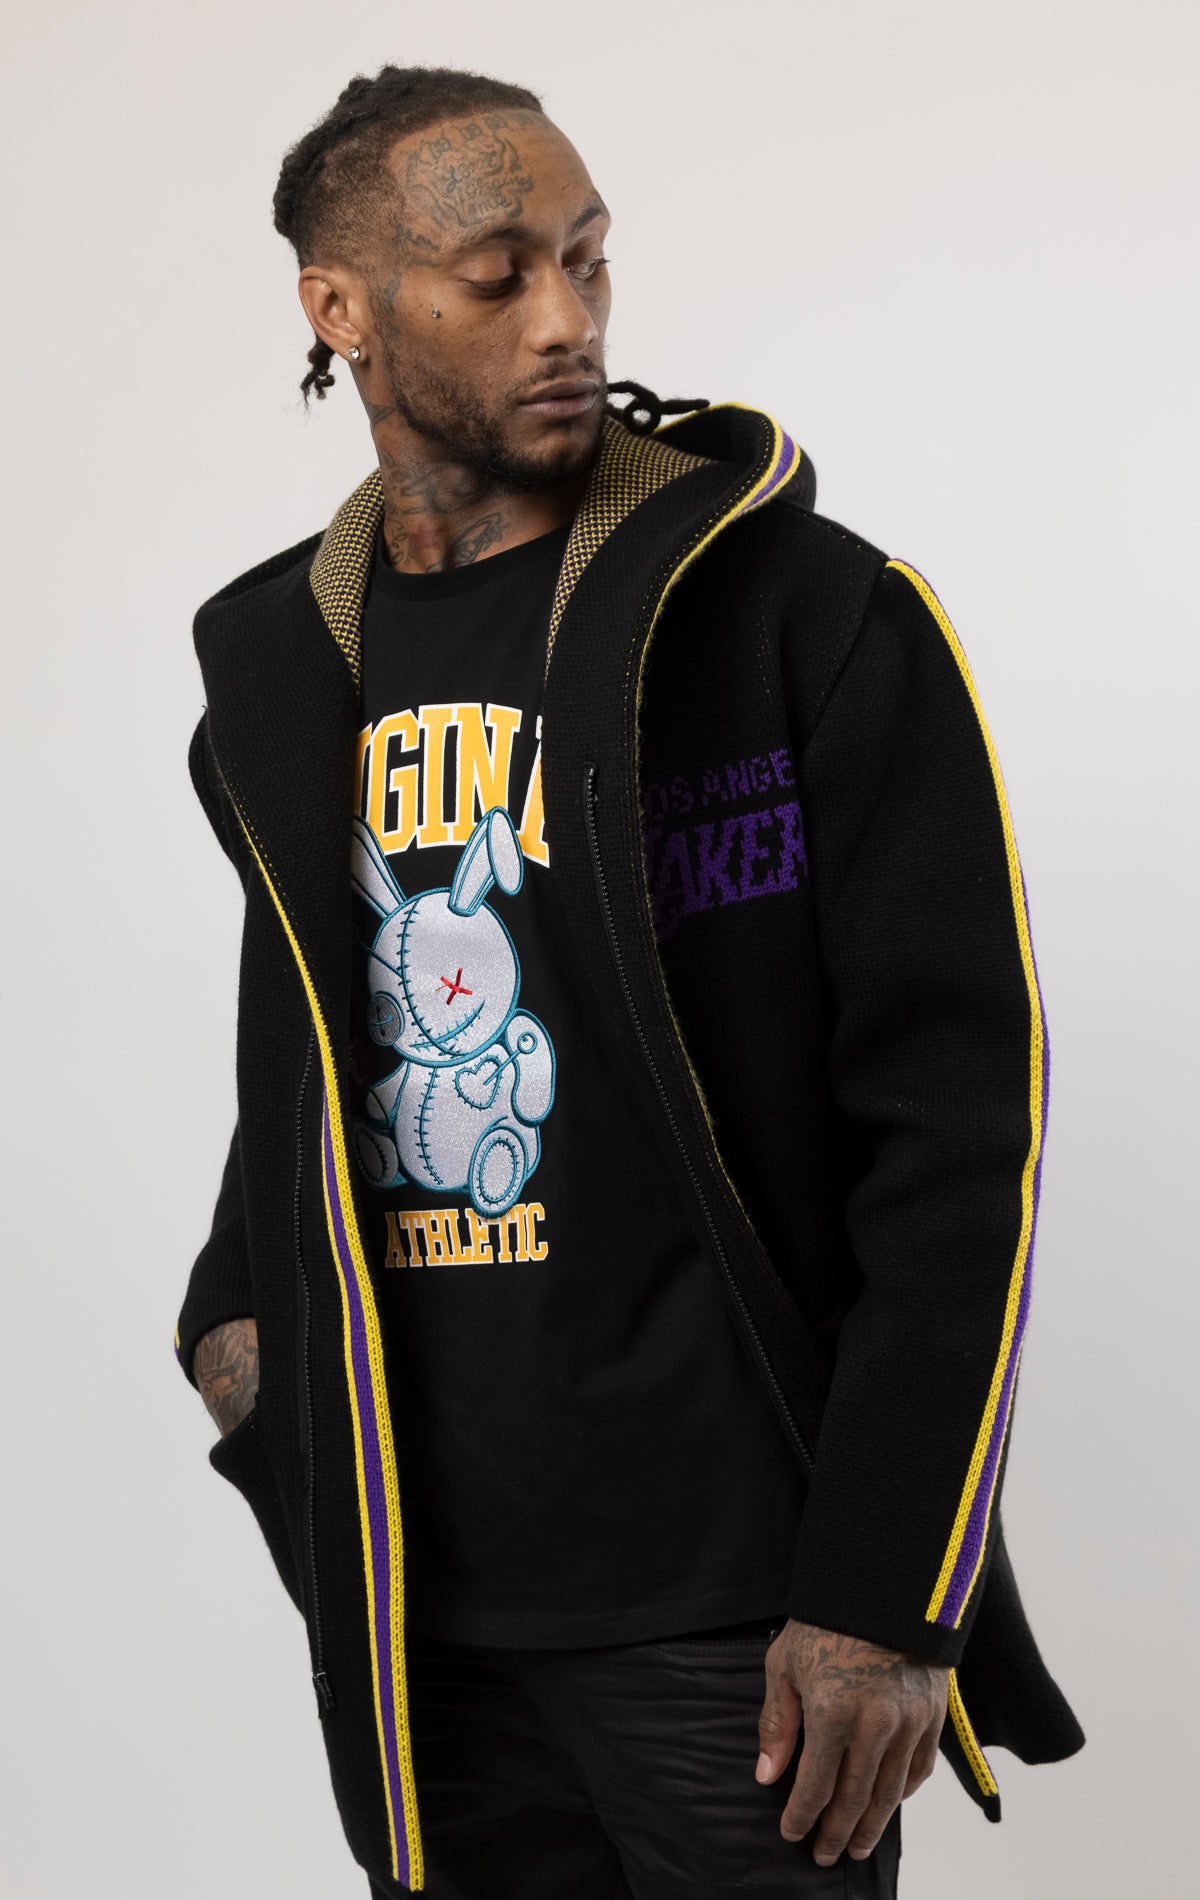 black LA LAKERS Cardigan Sweater. This cozy jacket is designed with a stylish three-quarter length and boasts bold team branding on the front, back, and sleeve. Complete with a full-zip closure, attached hood, and front pockets, this knit sweater offers both comfort and style.